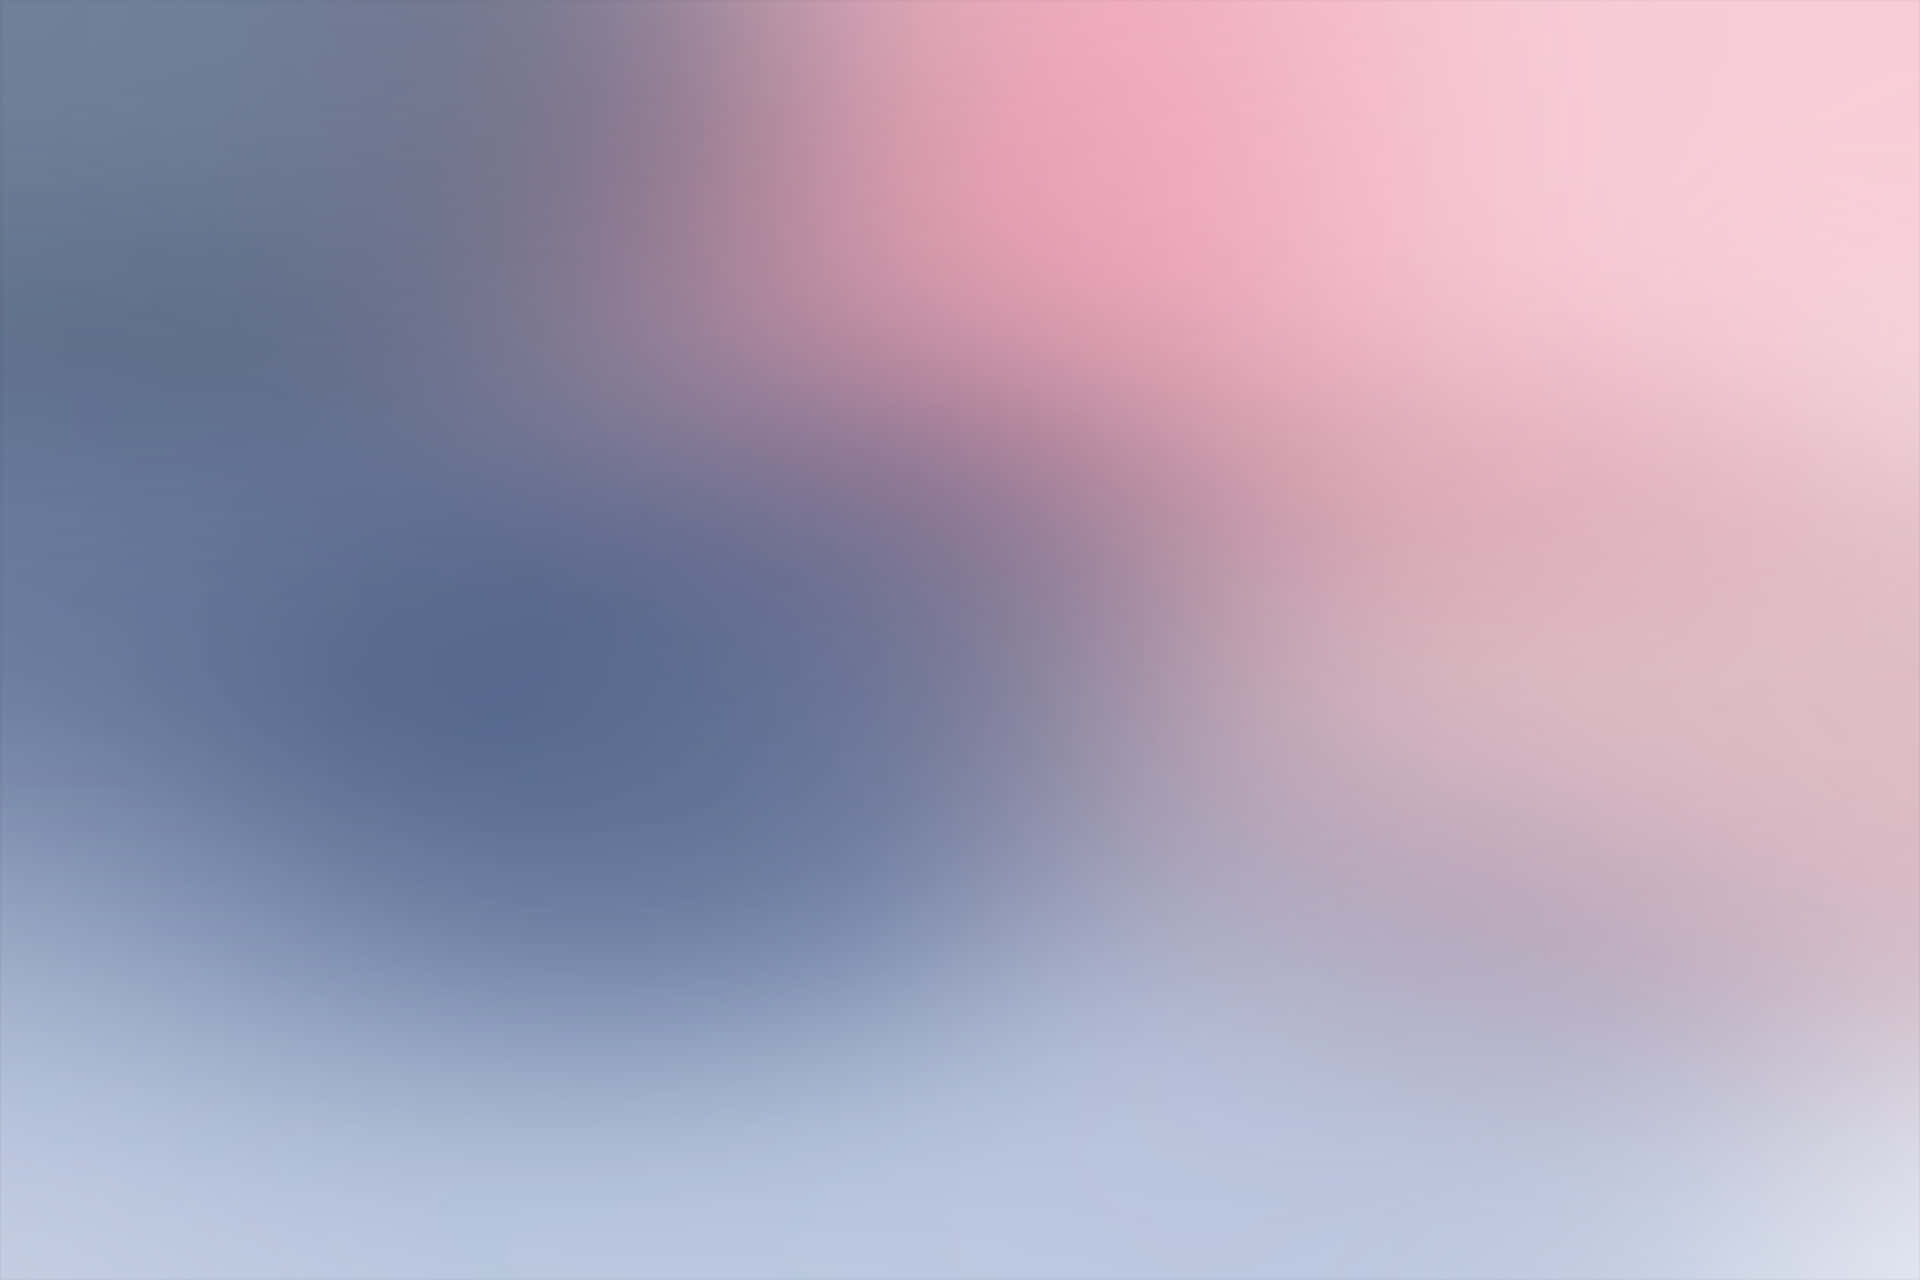 A Blurred Background With Pink And Blue Colors